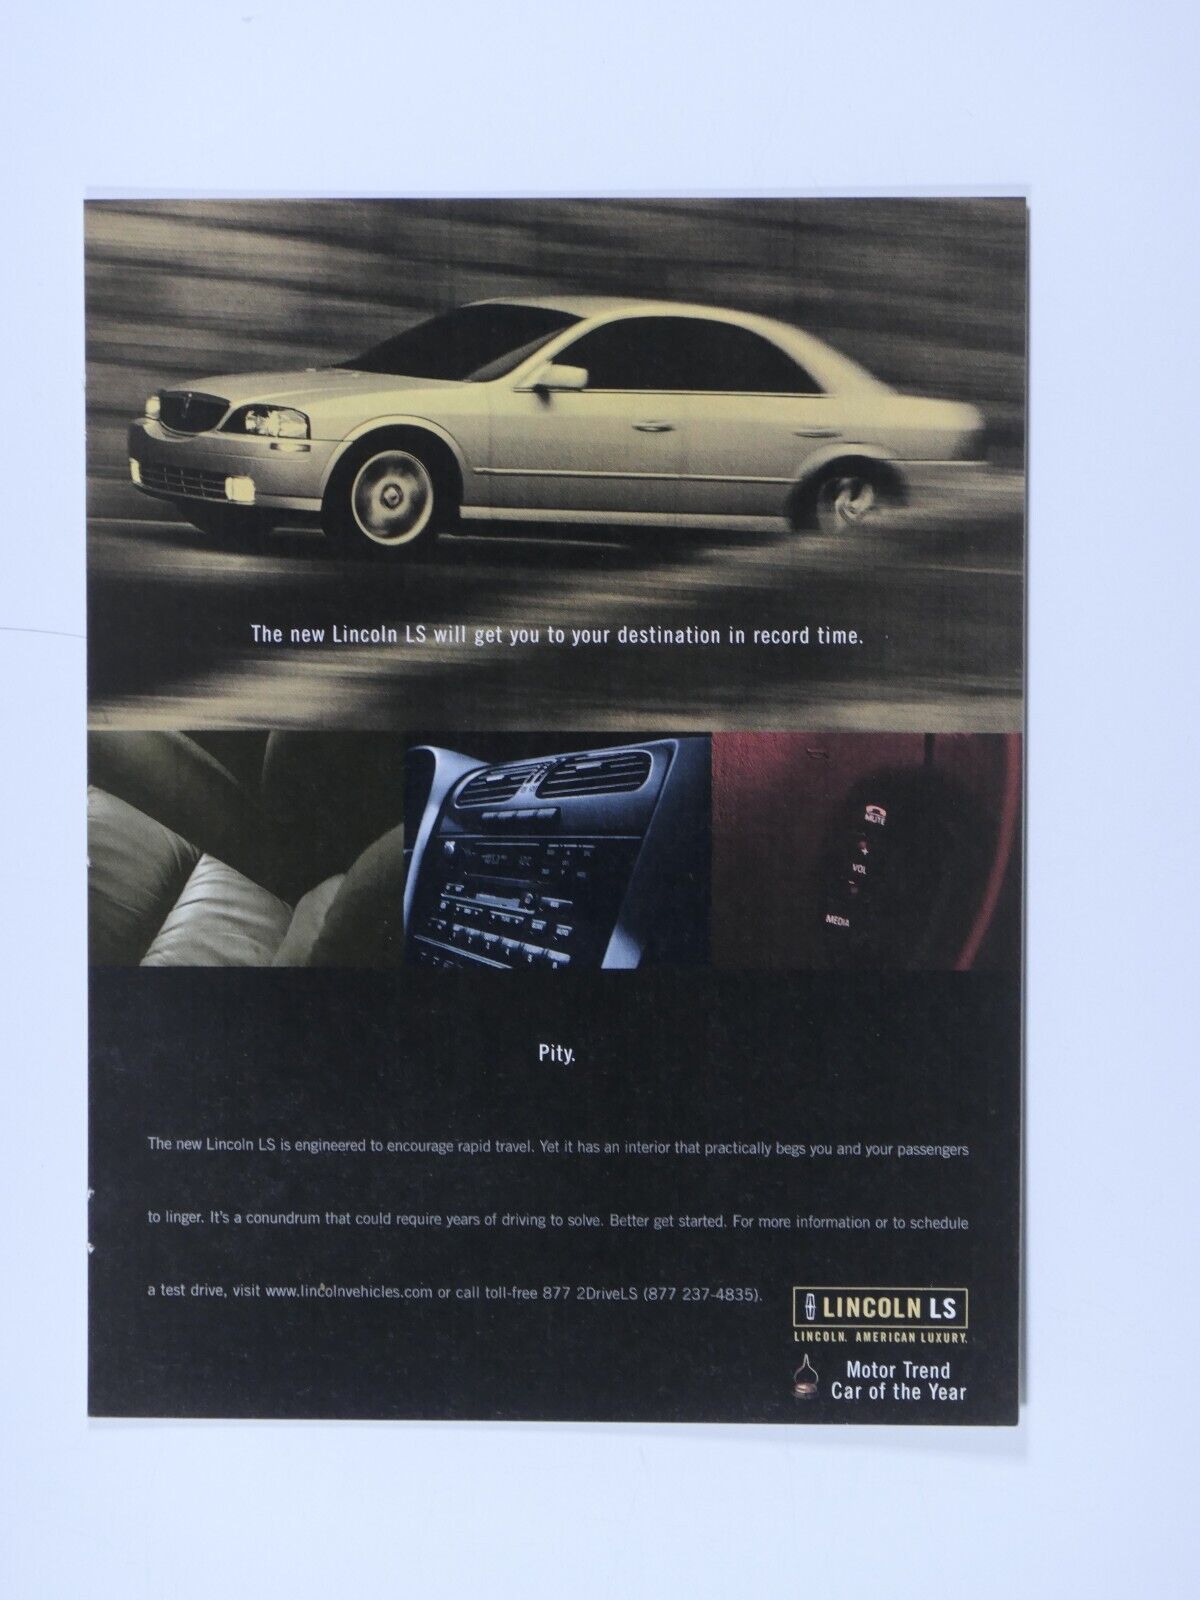 2000 Lincoln LS Vintage Motor Trend Car Of The Year Original Print Ad 8.5 x 11\